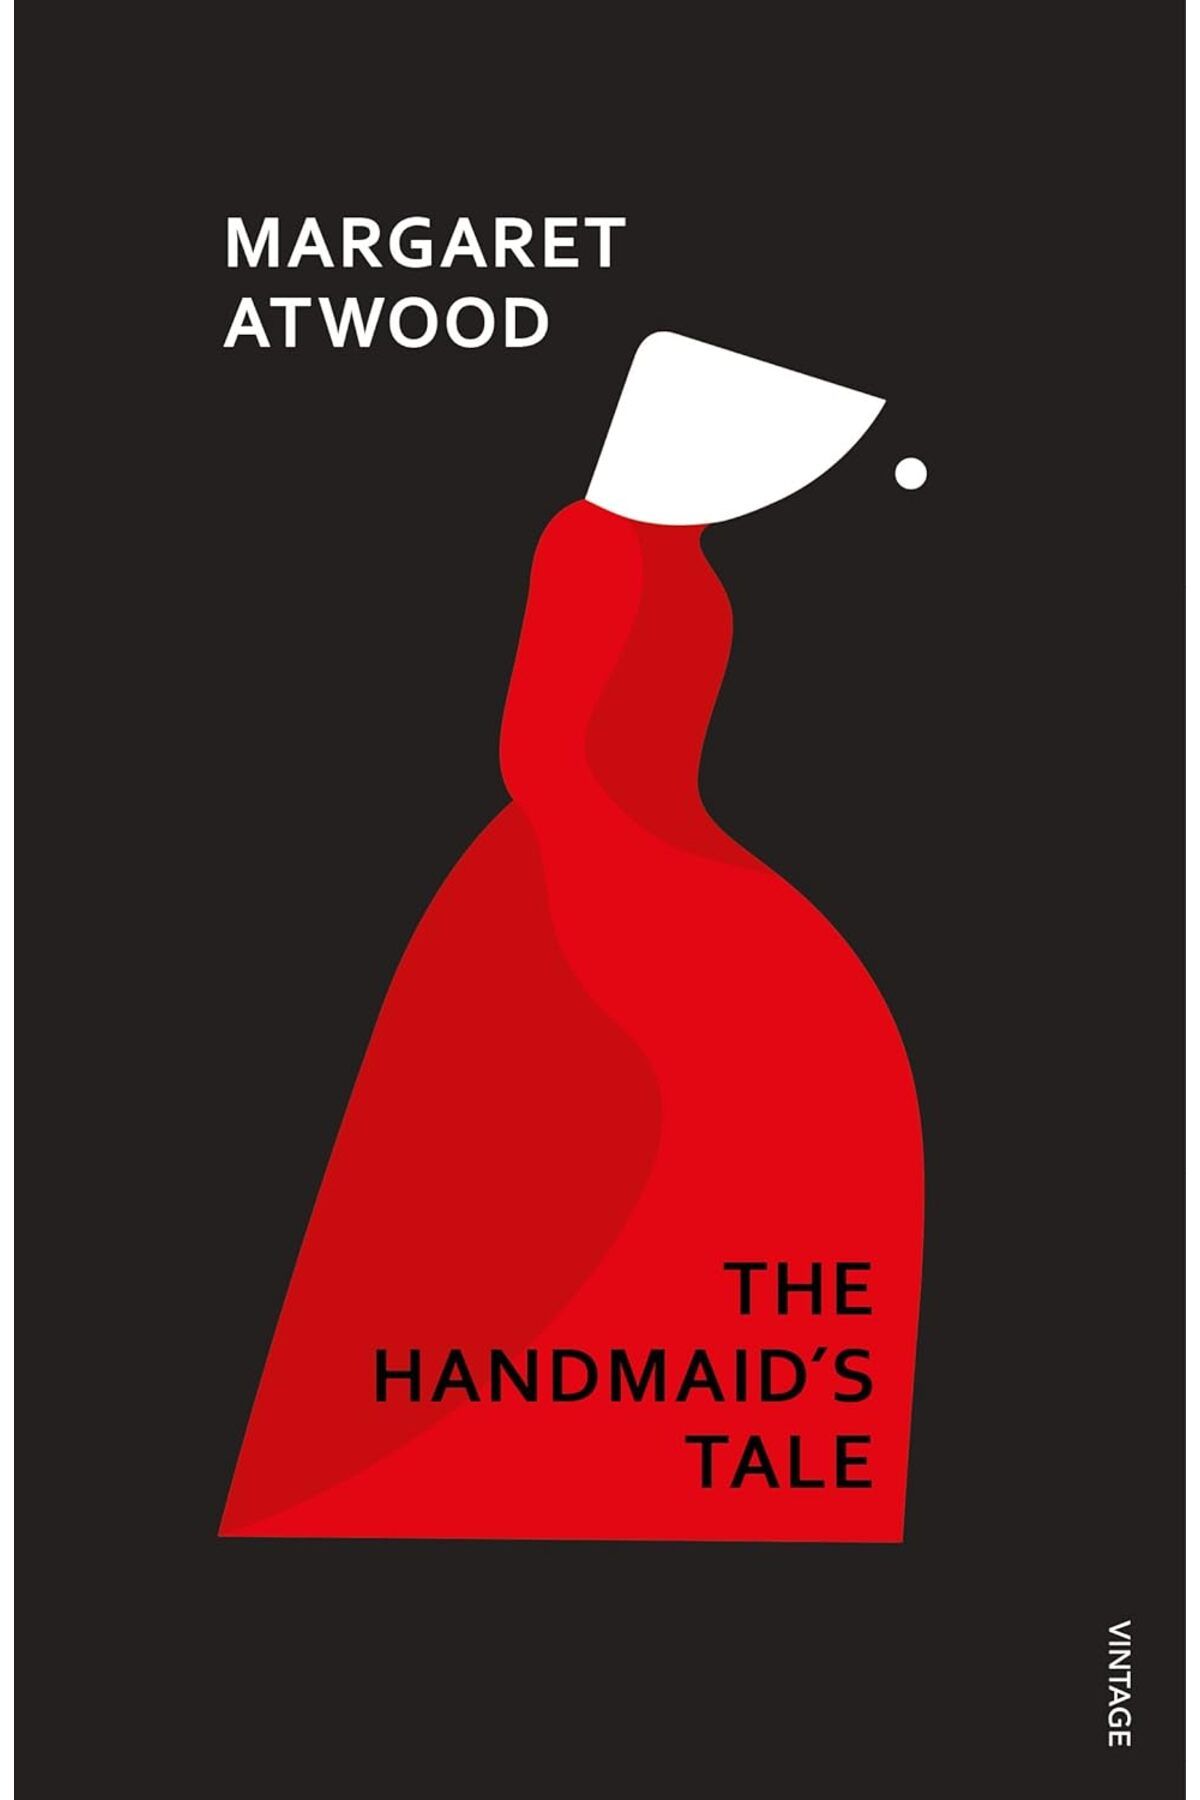 Green Tree The Handmaid's Tale - Margaret Atwood